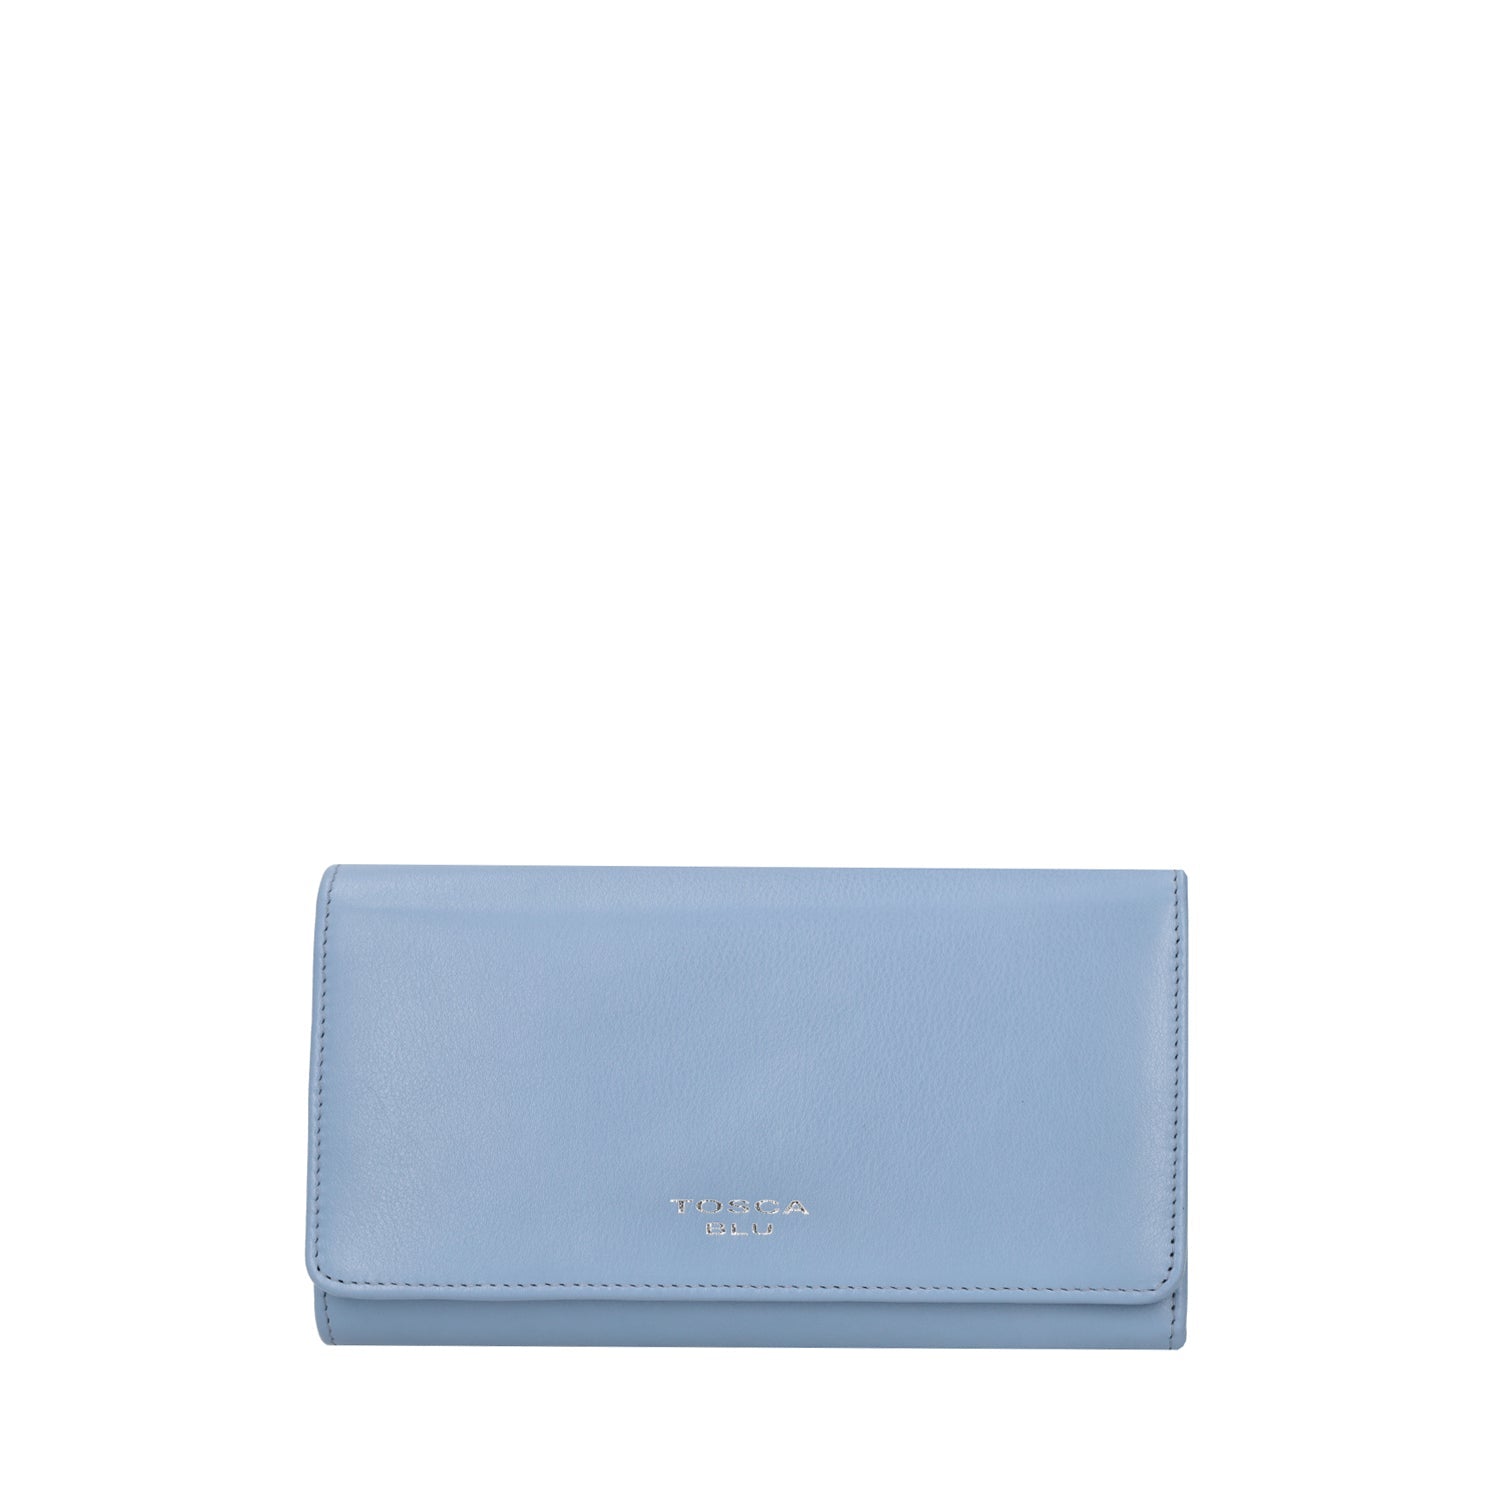 LIGHT BLUE LARGE BASIC WALLETS WALLET WITH FLAP